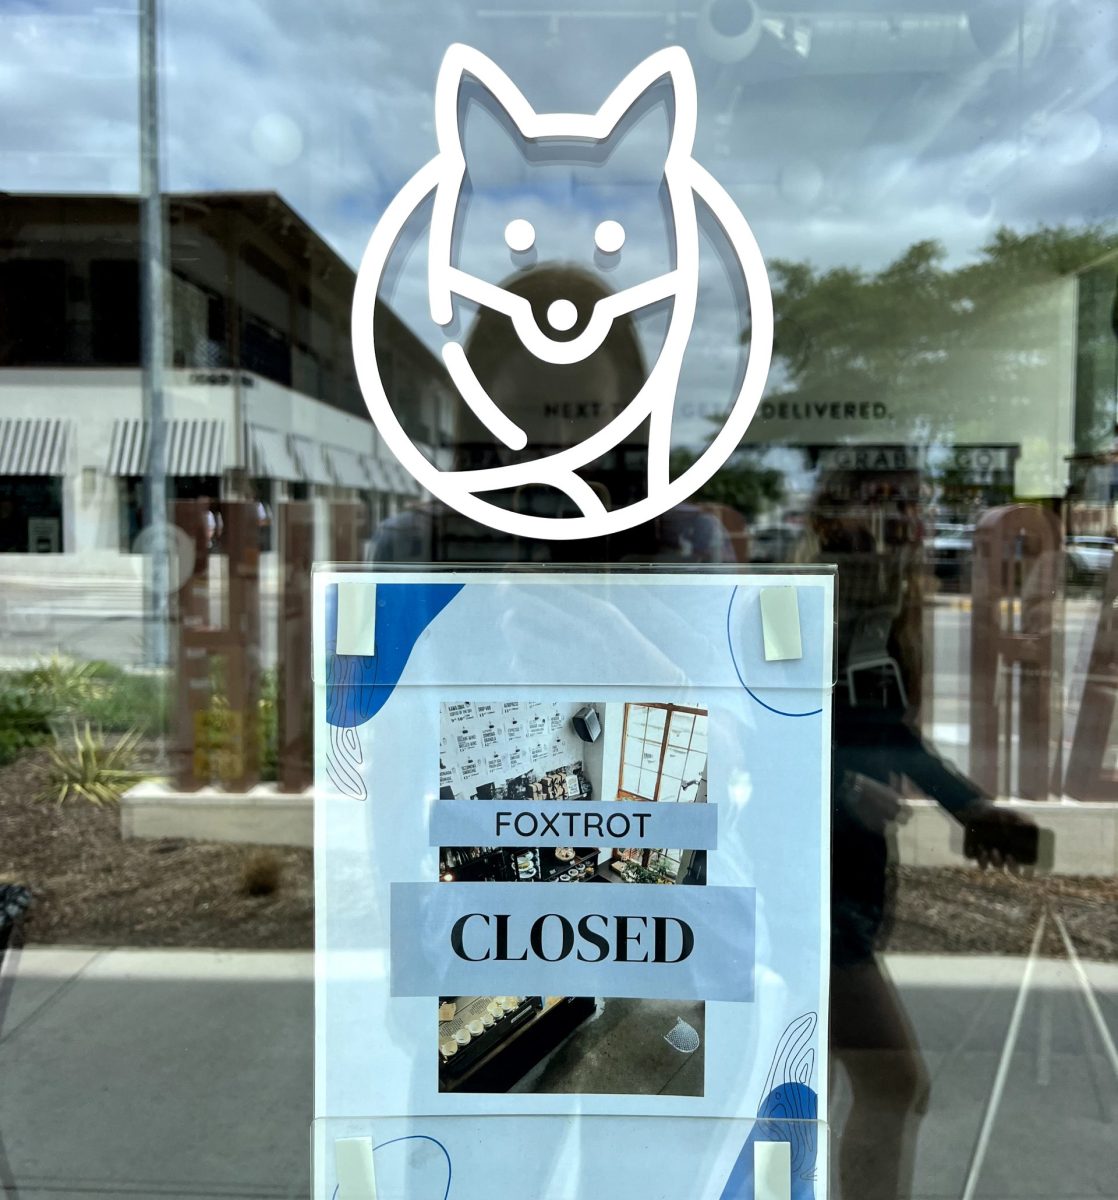 A closed sign appeared on the door of Foxtrots Hillcrest location across from SMU at around 11 a.m. Tuesday morning.